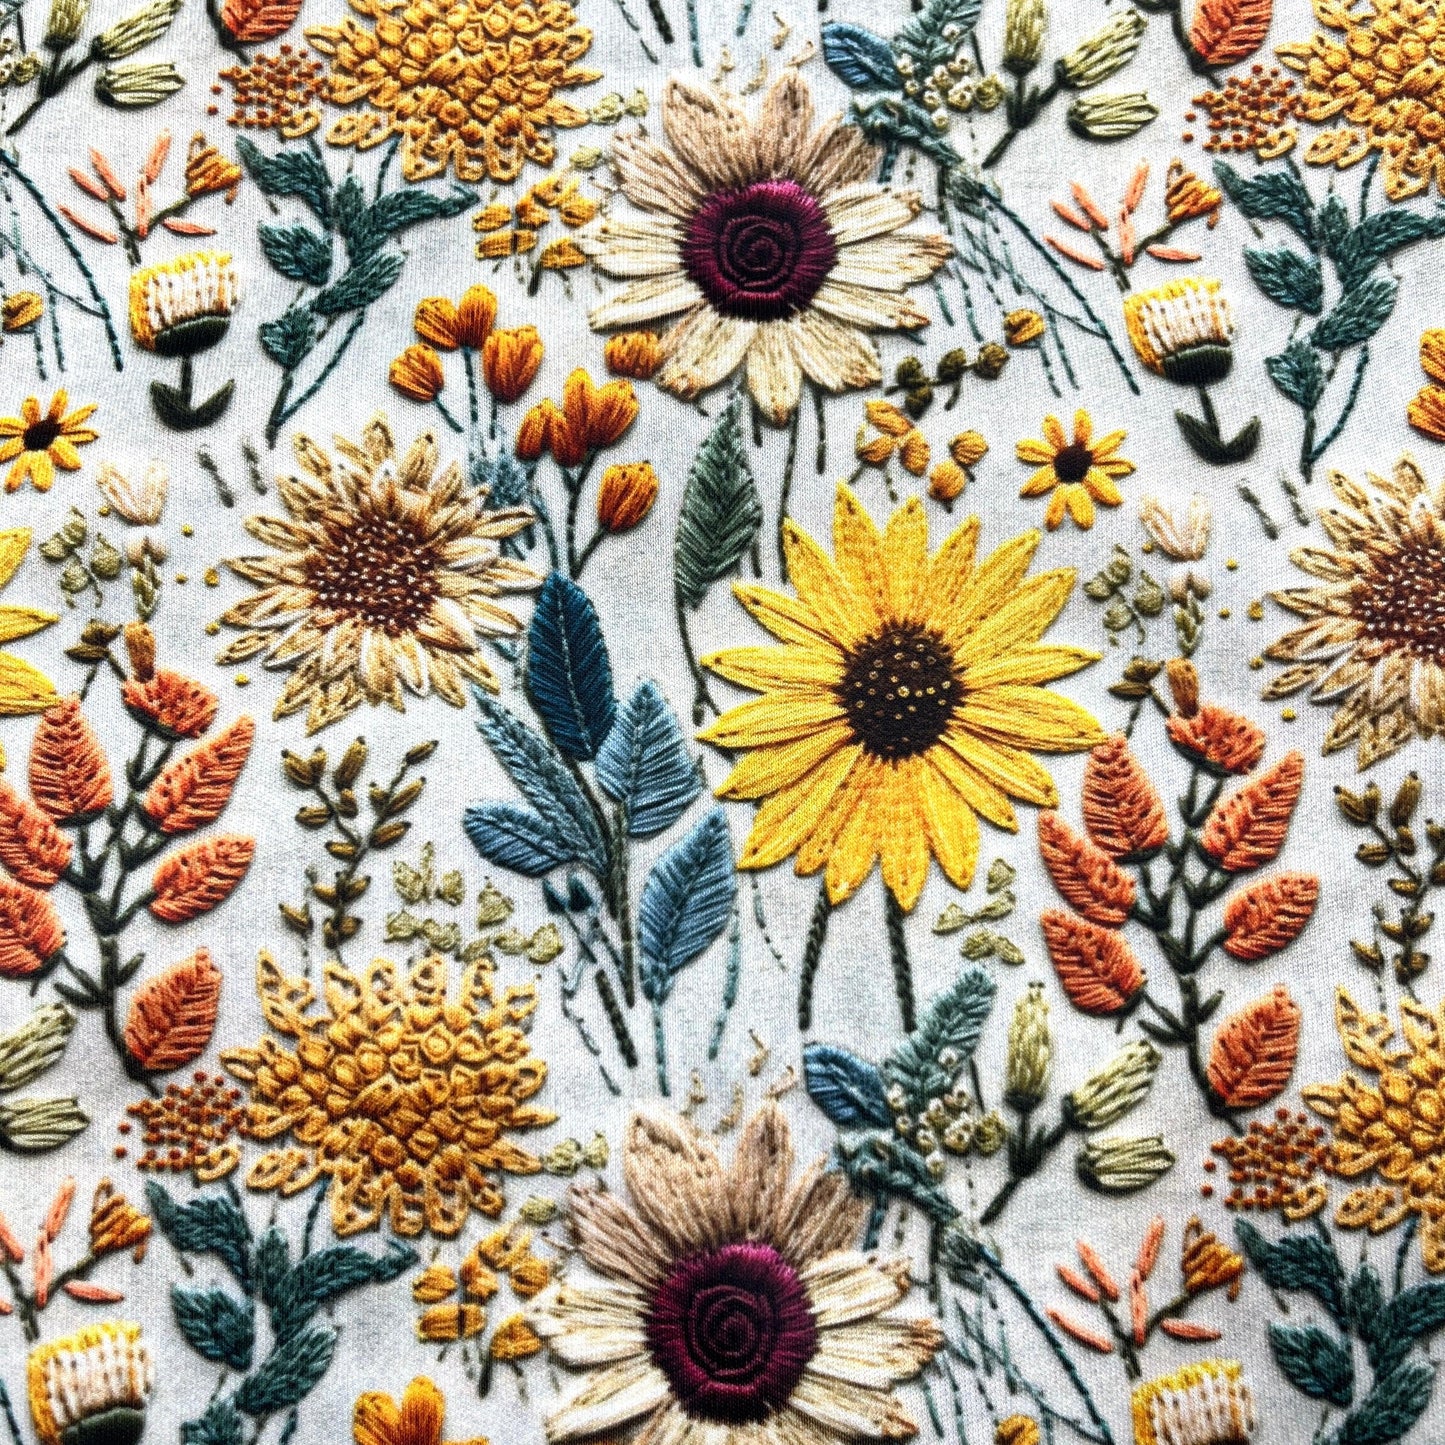 Embroidered Sunflowers 1 mil PUL Fabric- Made in the USA - Nature's Fabrics